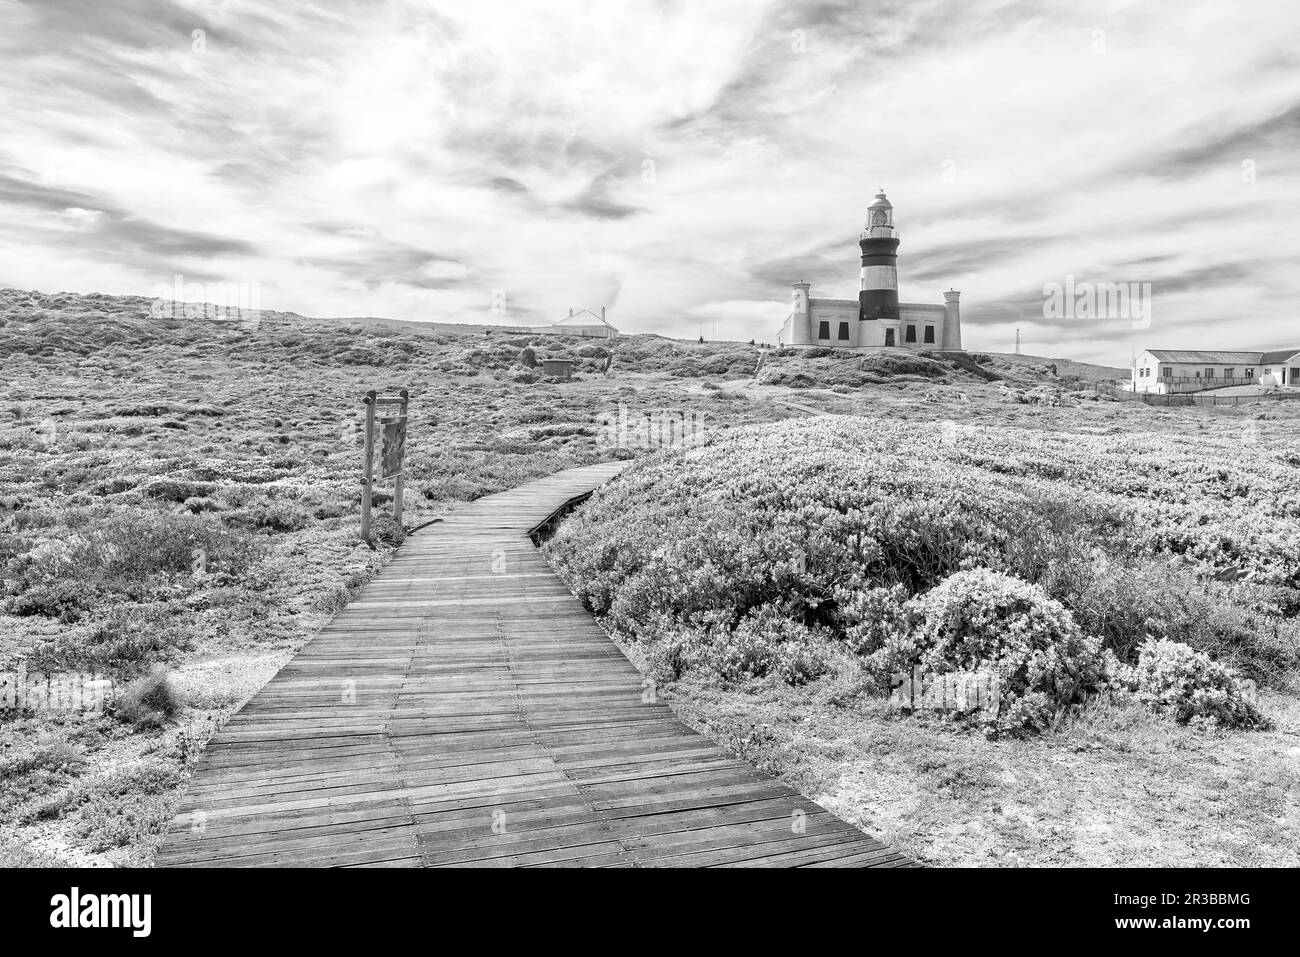 The historic Agulhas lighthouse at the most southern tip of Africa, Cape Agulhas. The boardwalk to the lighthouse is visible. Monochrome Stock Photo